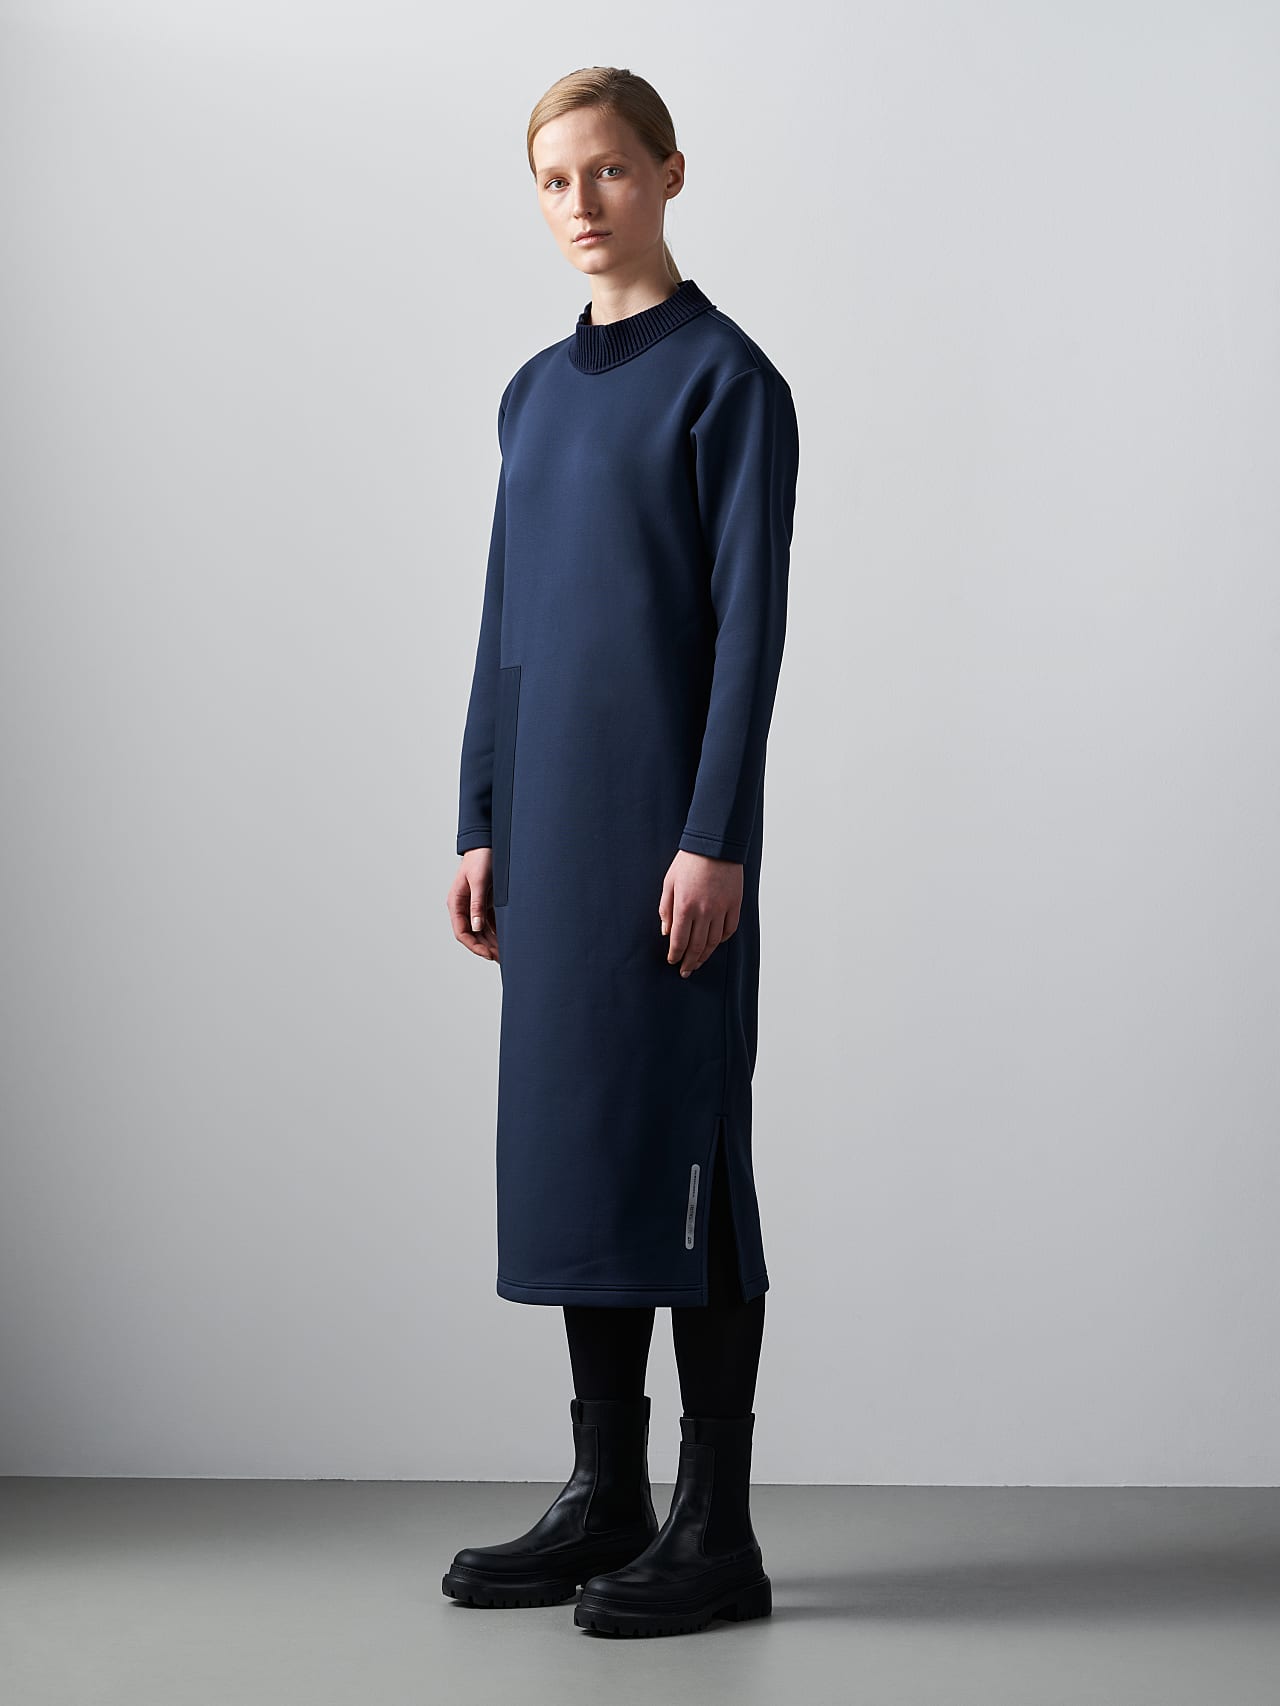 AlphaTauri | SINLE V1.Y5.02 | Technical Spacer Maxi Dress in navy for Women